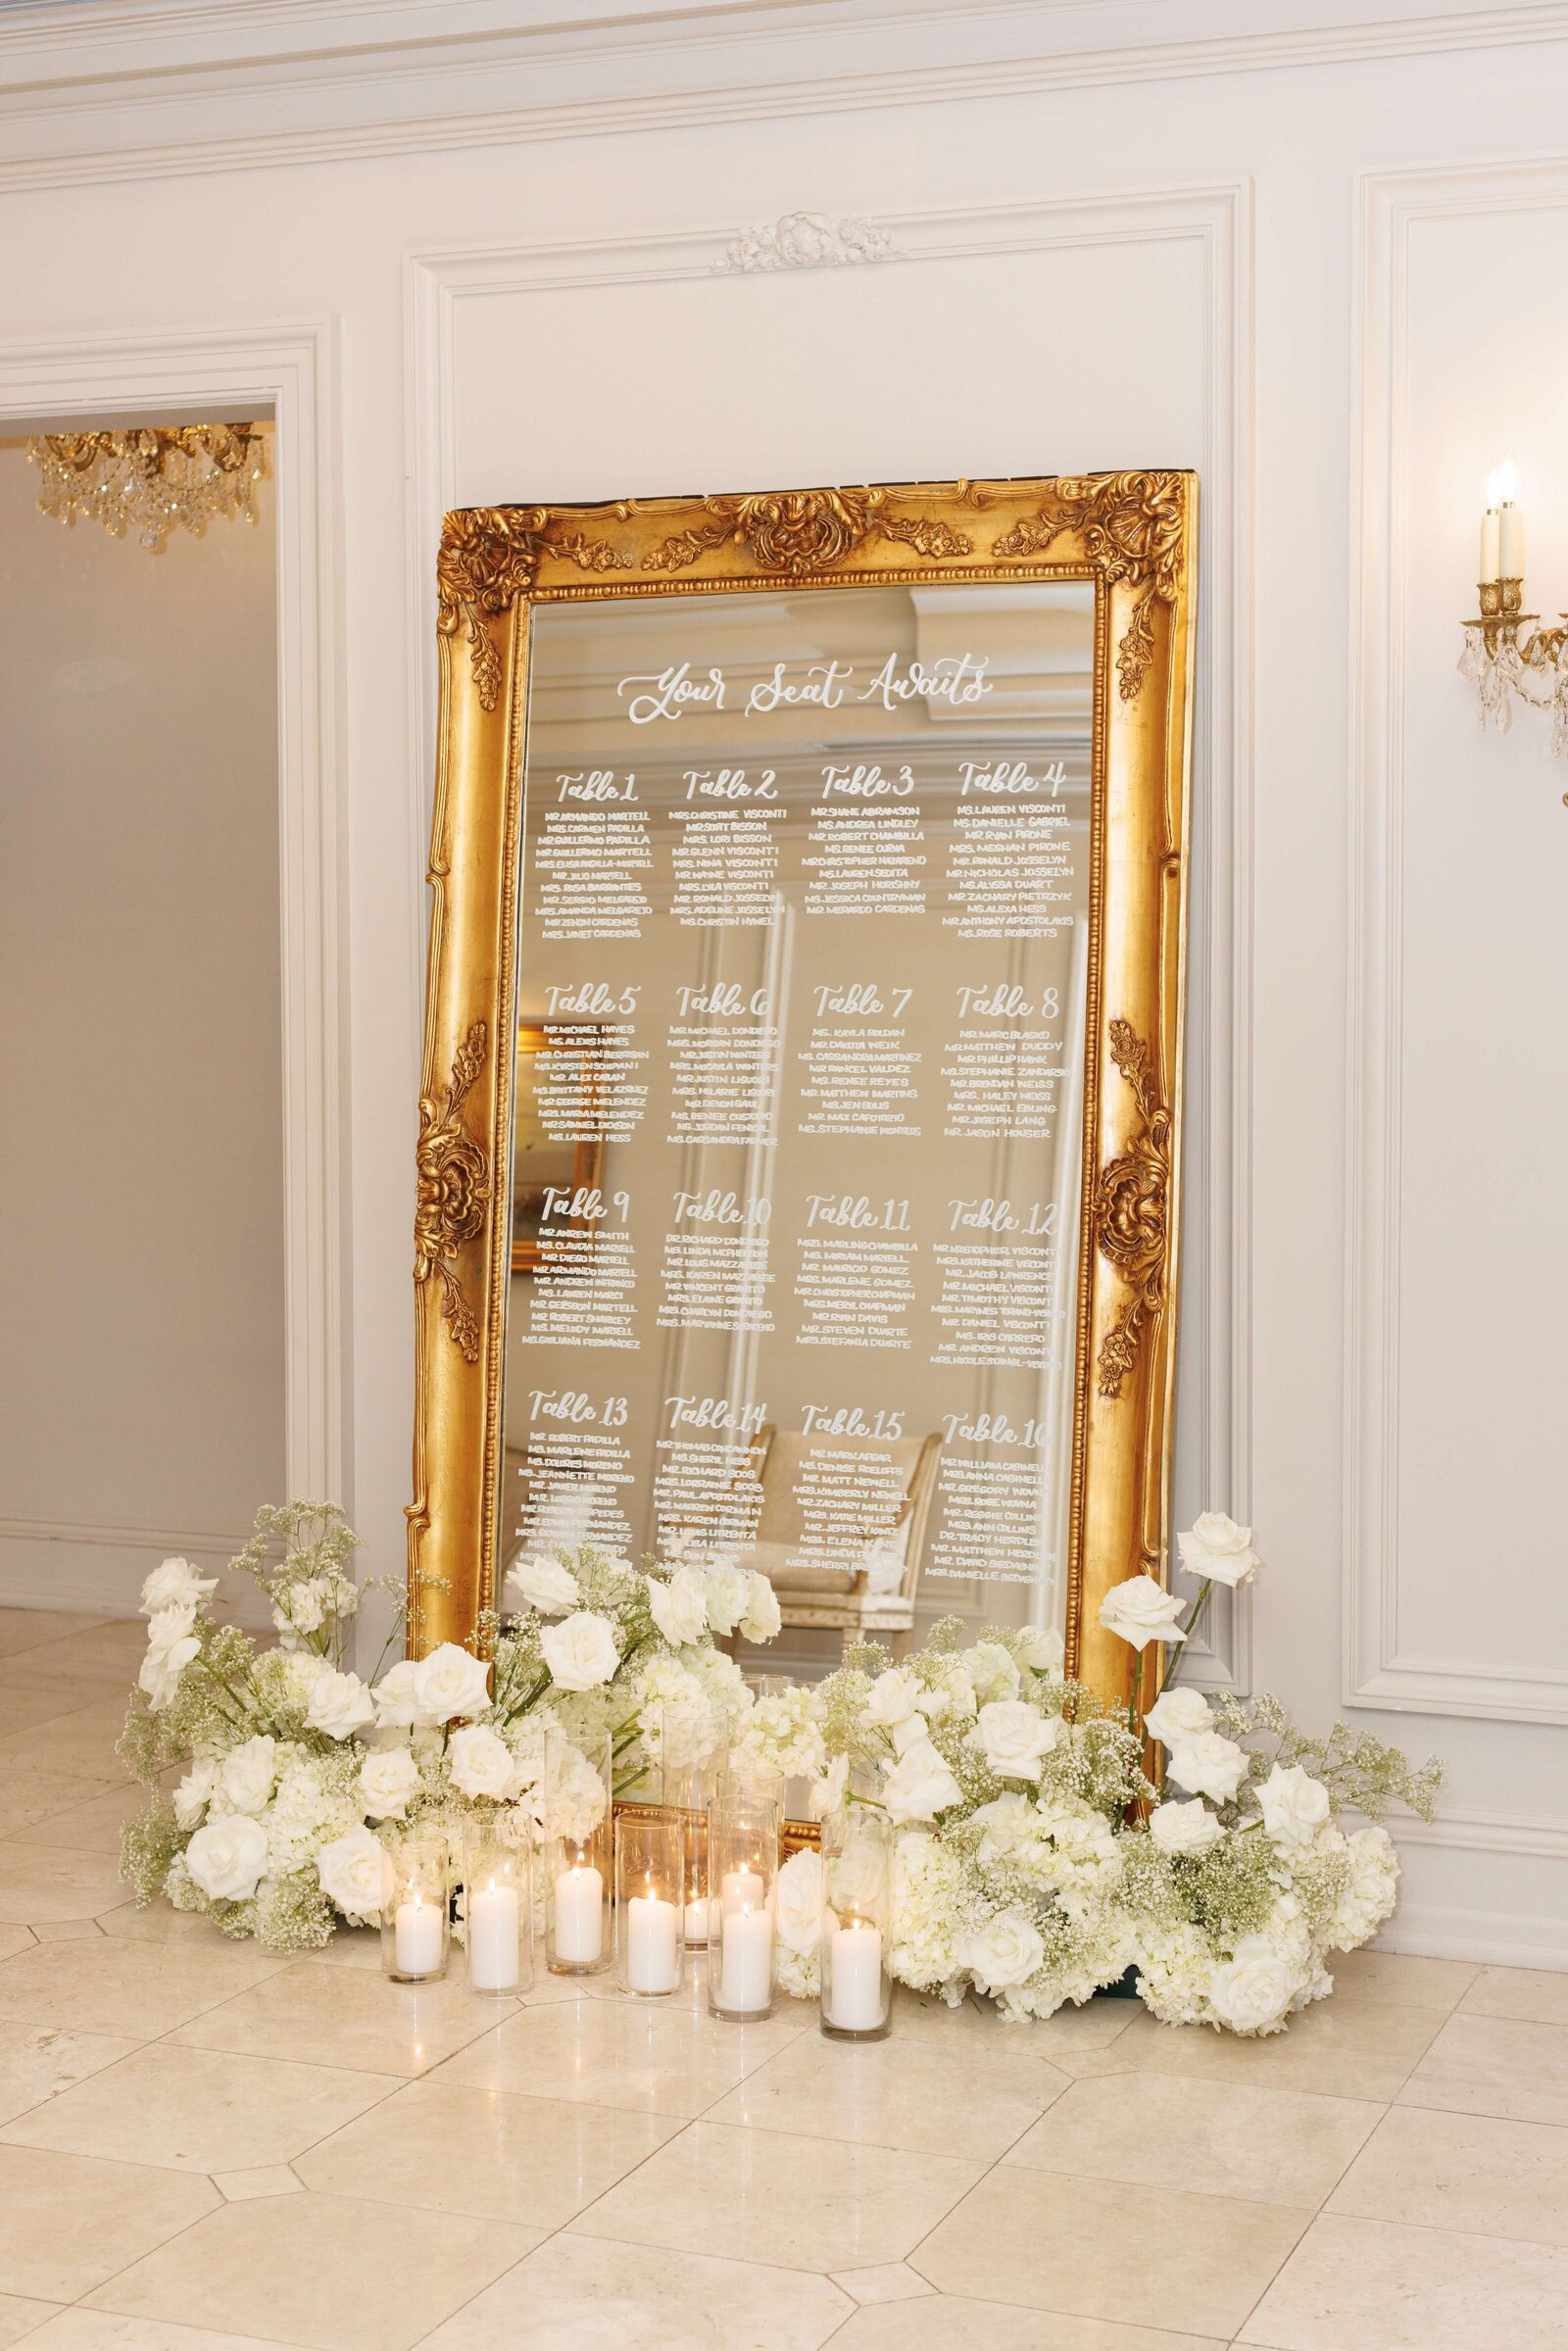 SGH Creative Luxury Wedding Signage & Stationery in New York & New Jersey - Full Gallery (123)